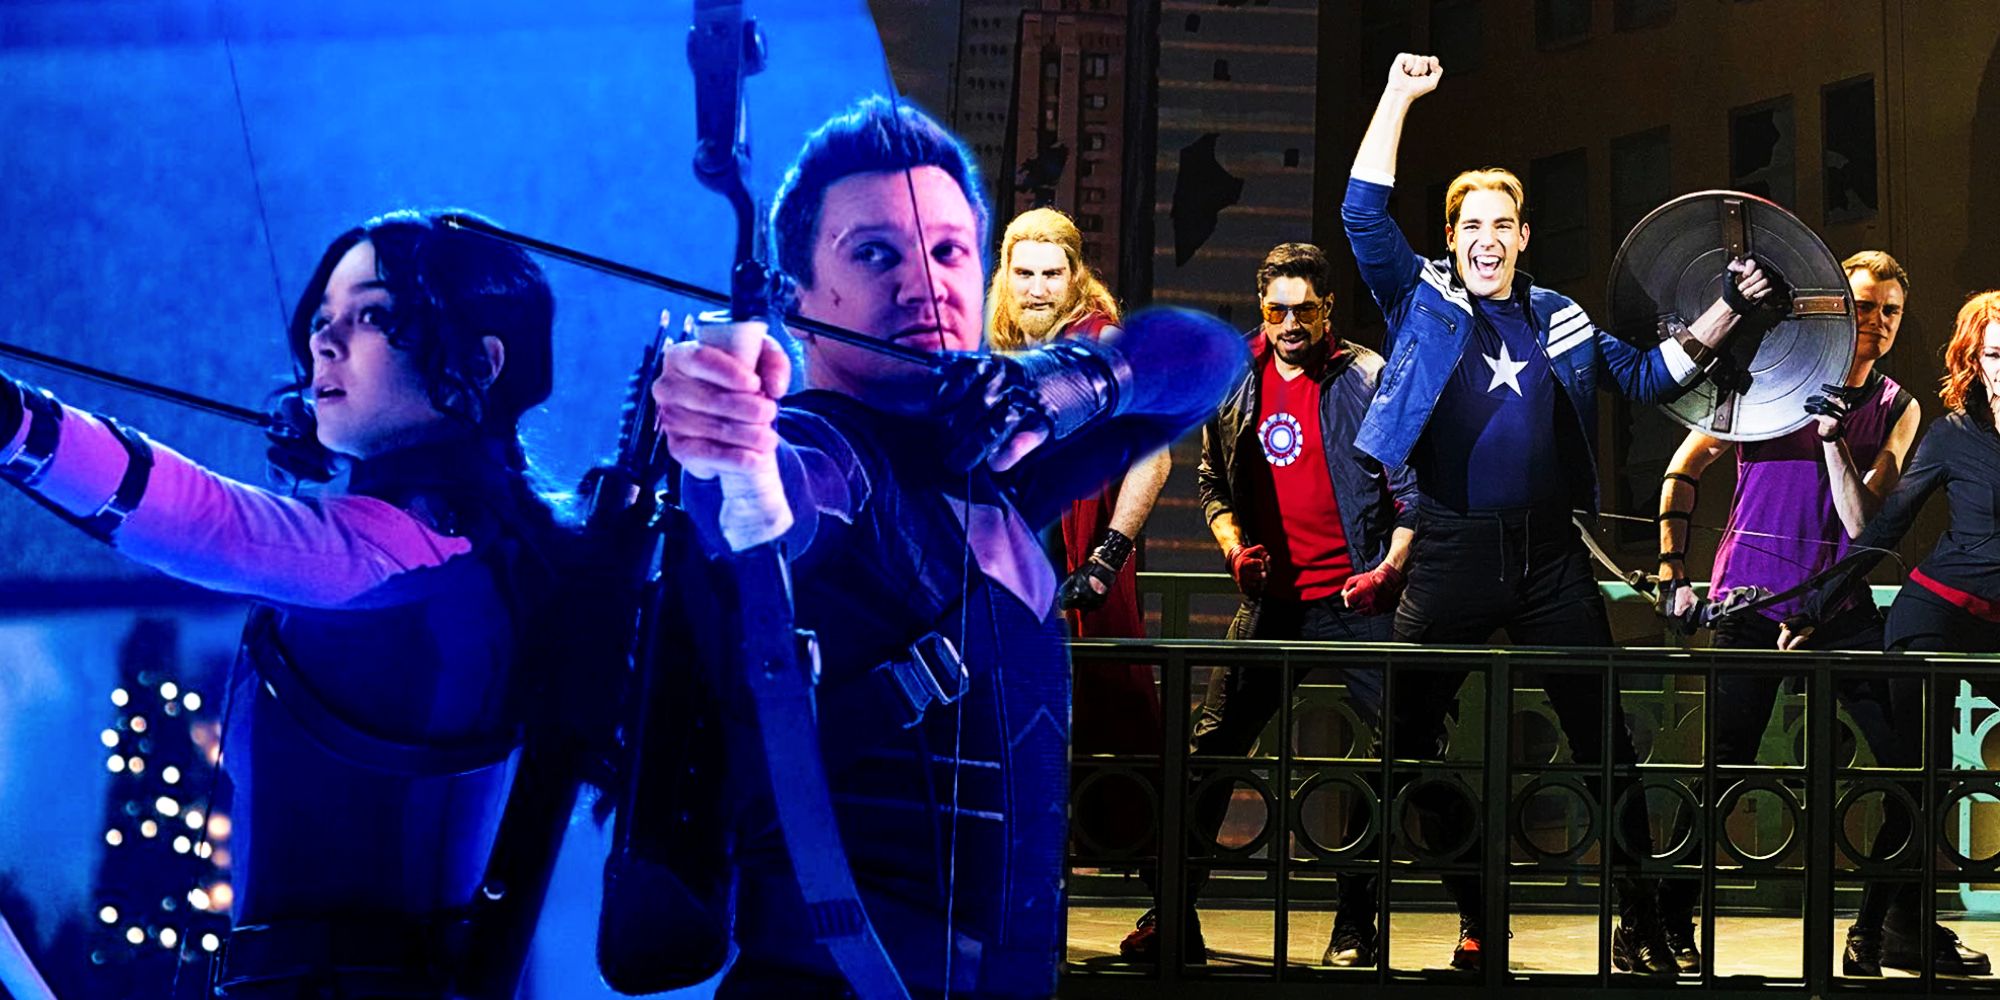 Rogers The Musical, Jeremy Renner as Clint Barton, and Hailee Steinfeld as Kate Bishop in Hawkeye